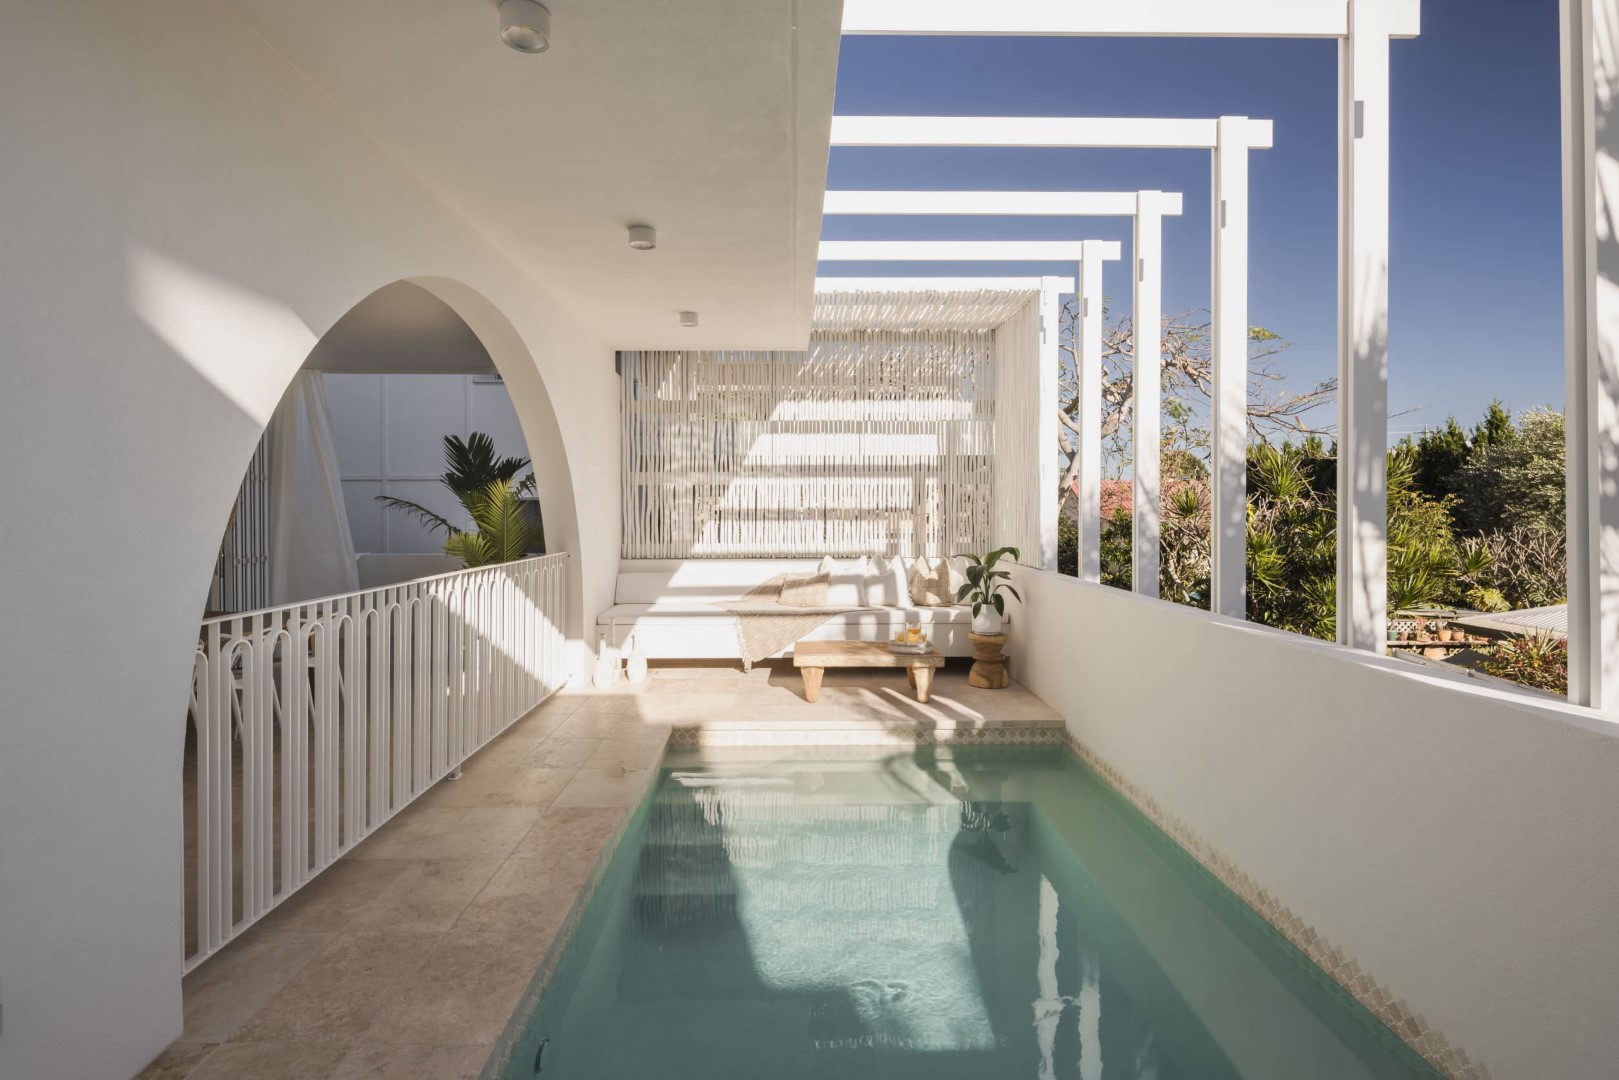 20 Mesmerizing Mediterranean Swimming Pool Designs You Will Obsess Over